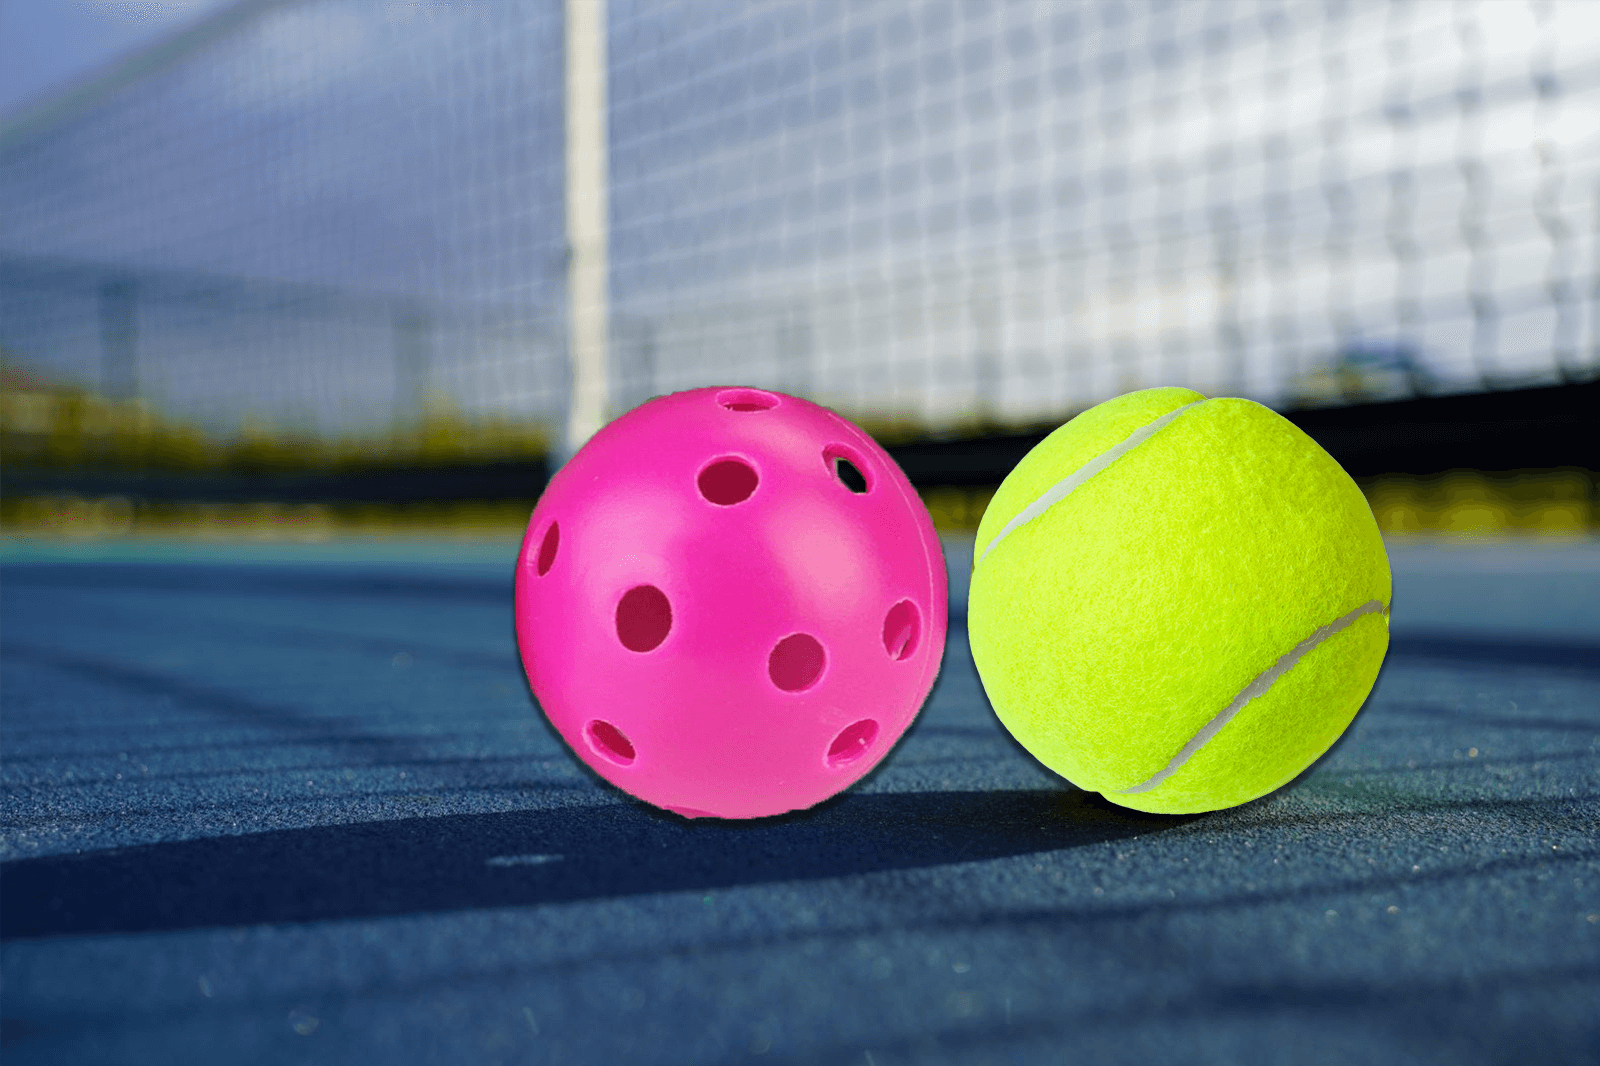 Is pickleball easier than tennis? A comparison of the rules